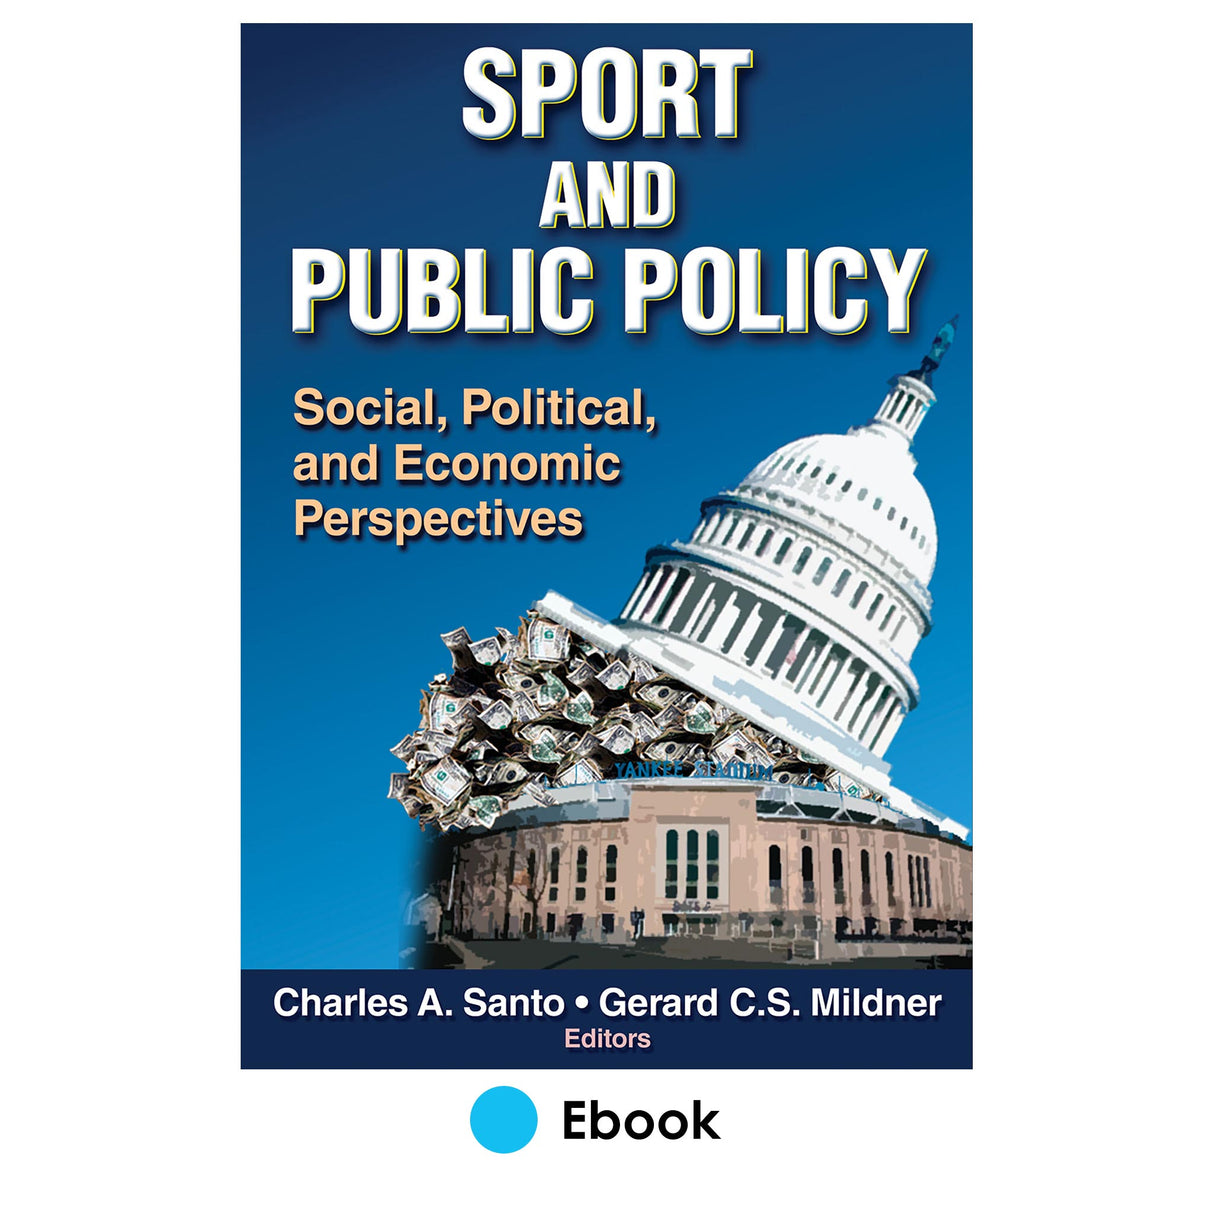 Sport and Public Policy PDF